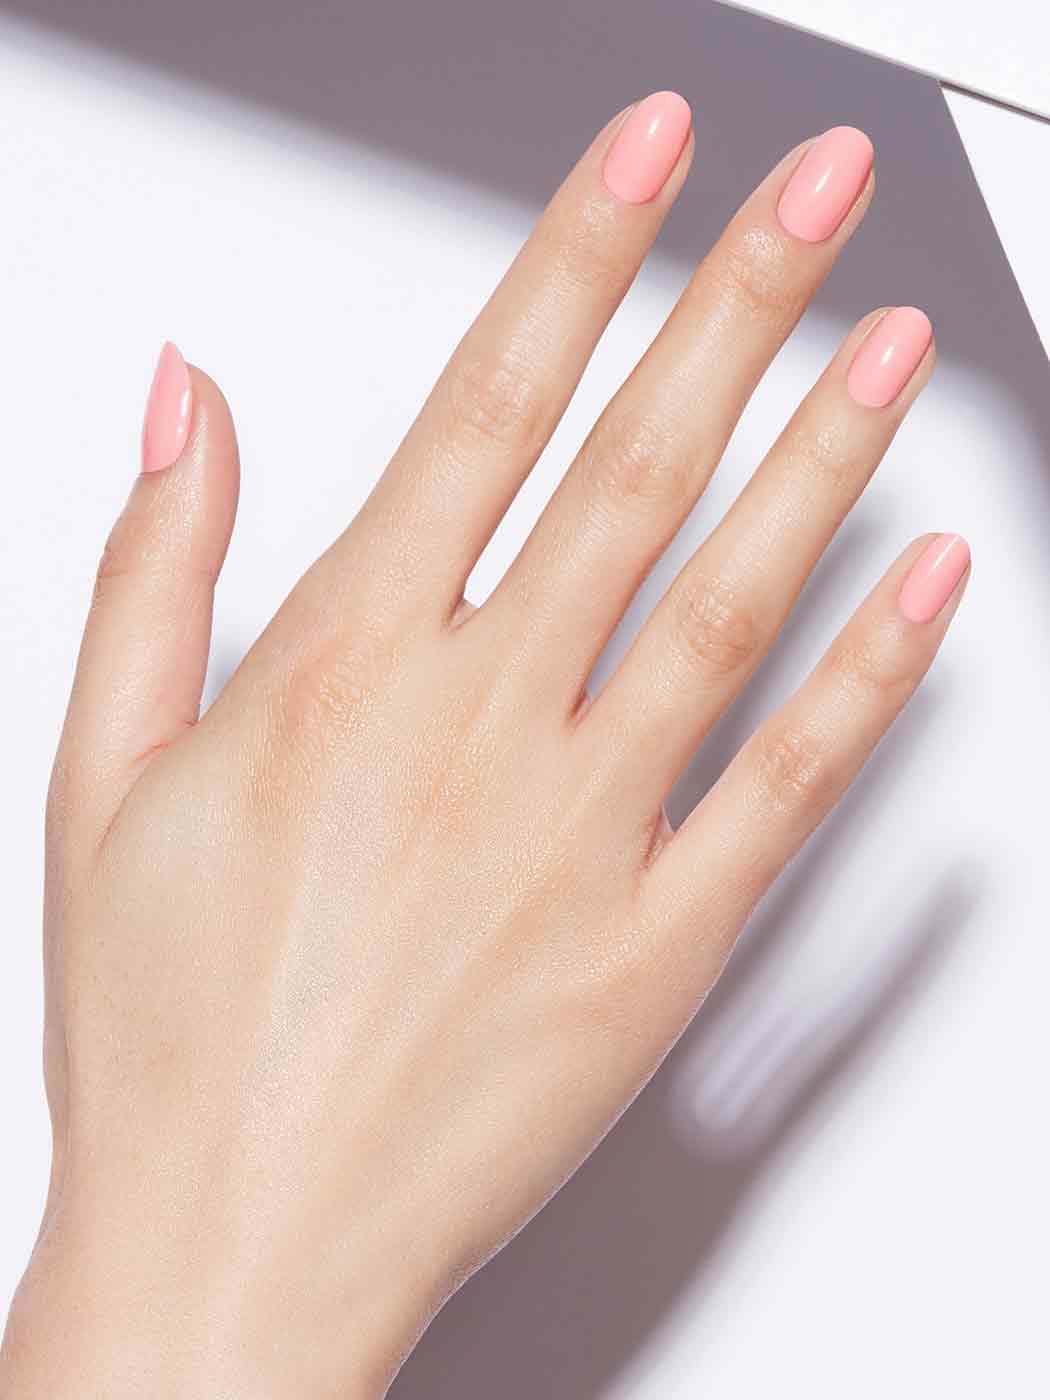 Buy CANNI Gel nail polish Peach Naked Series color gel UV&LED soak off Nail  Gel Polish (16ml-C002) Online at Low Prices in India - Amazon.in